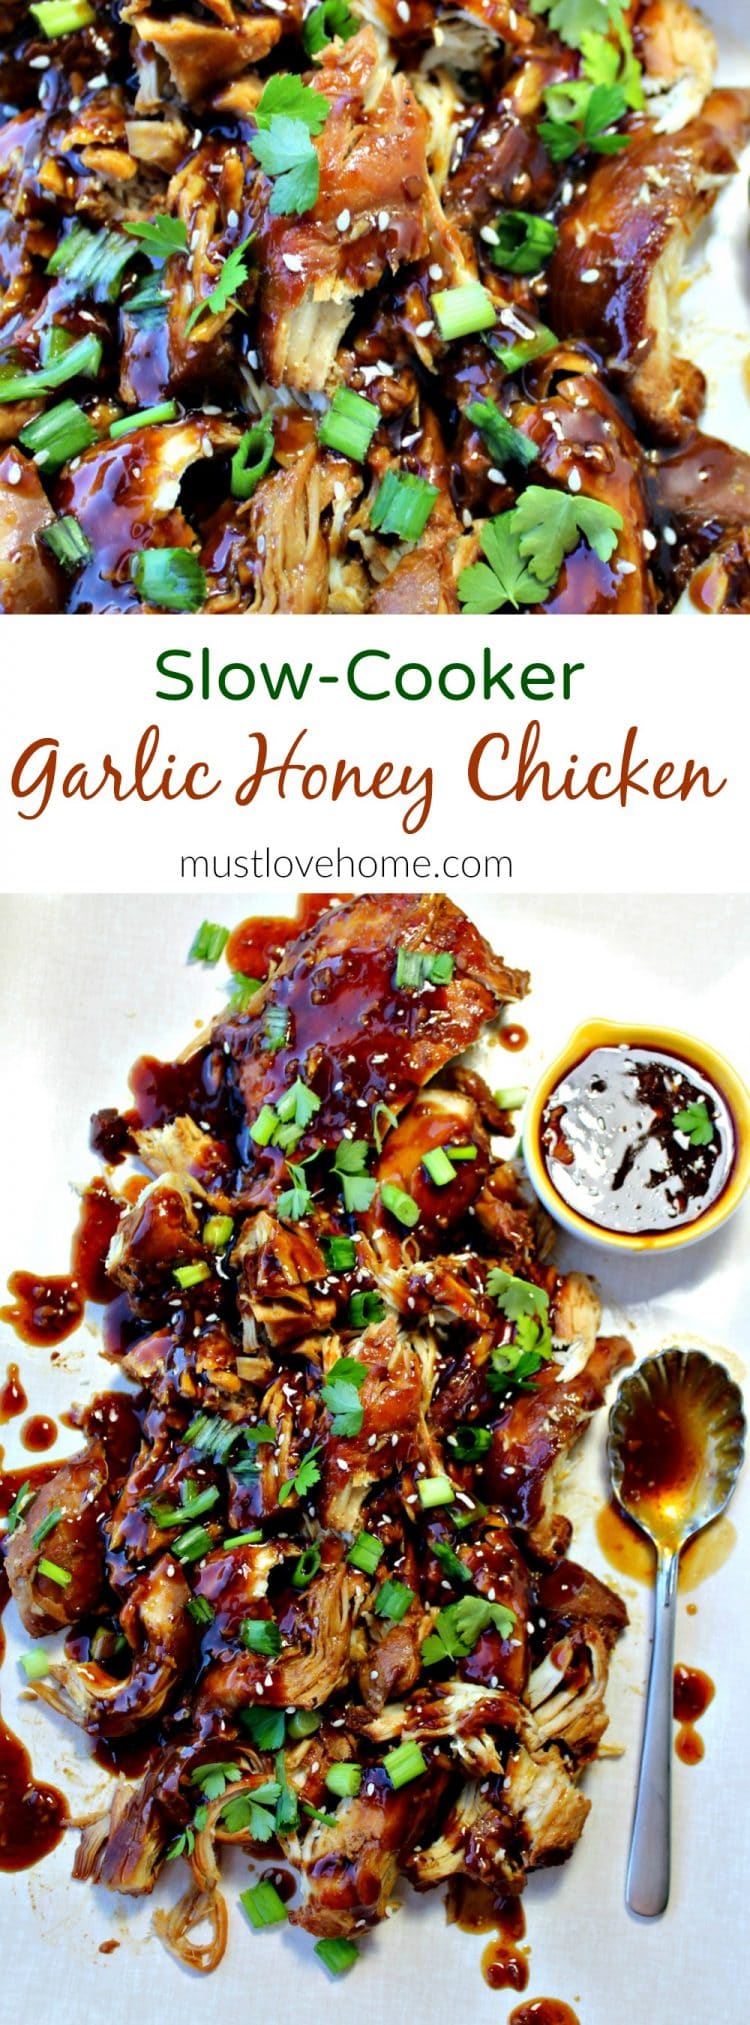 Slow Cooker Garlic Honey Chicken is tender, slow cooked chicken breasts covered in a sweet, spicy garlic sauce that will have everyone asking for seconds!